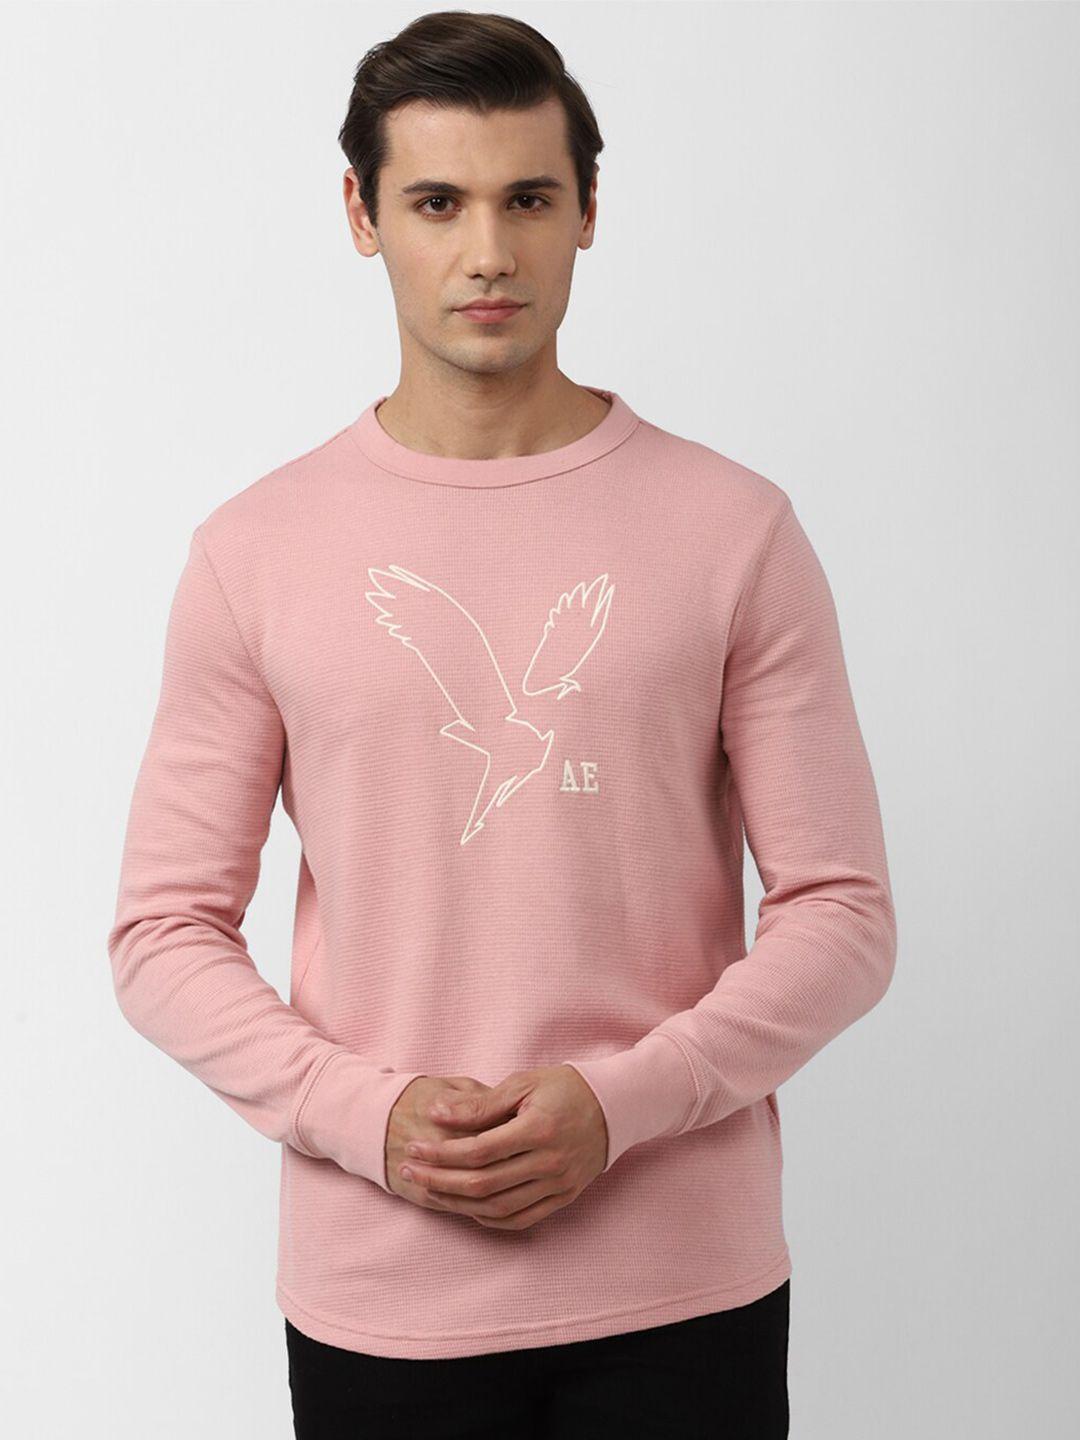 american-eagle-outfitters-men-pink-brand-logo-printed-t-shirt